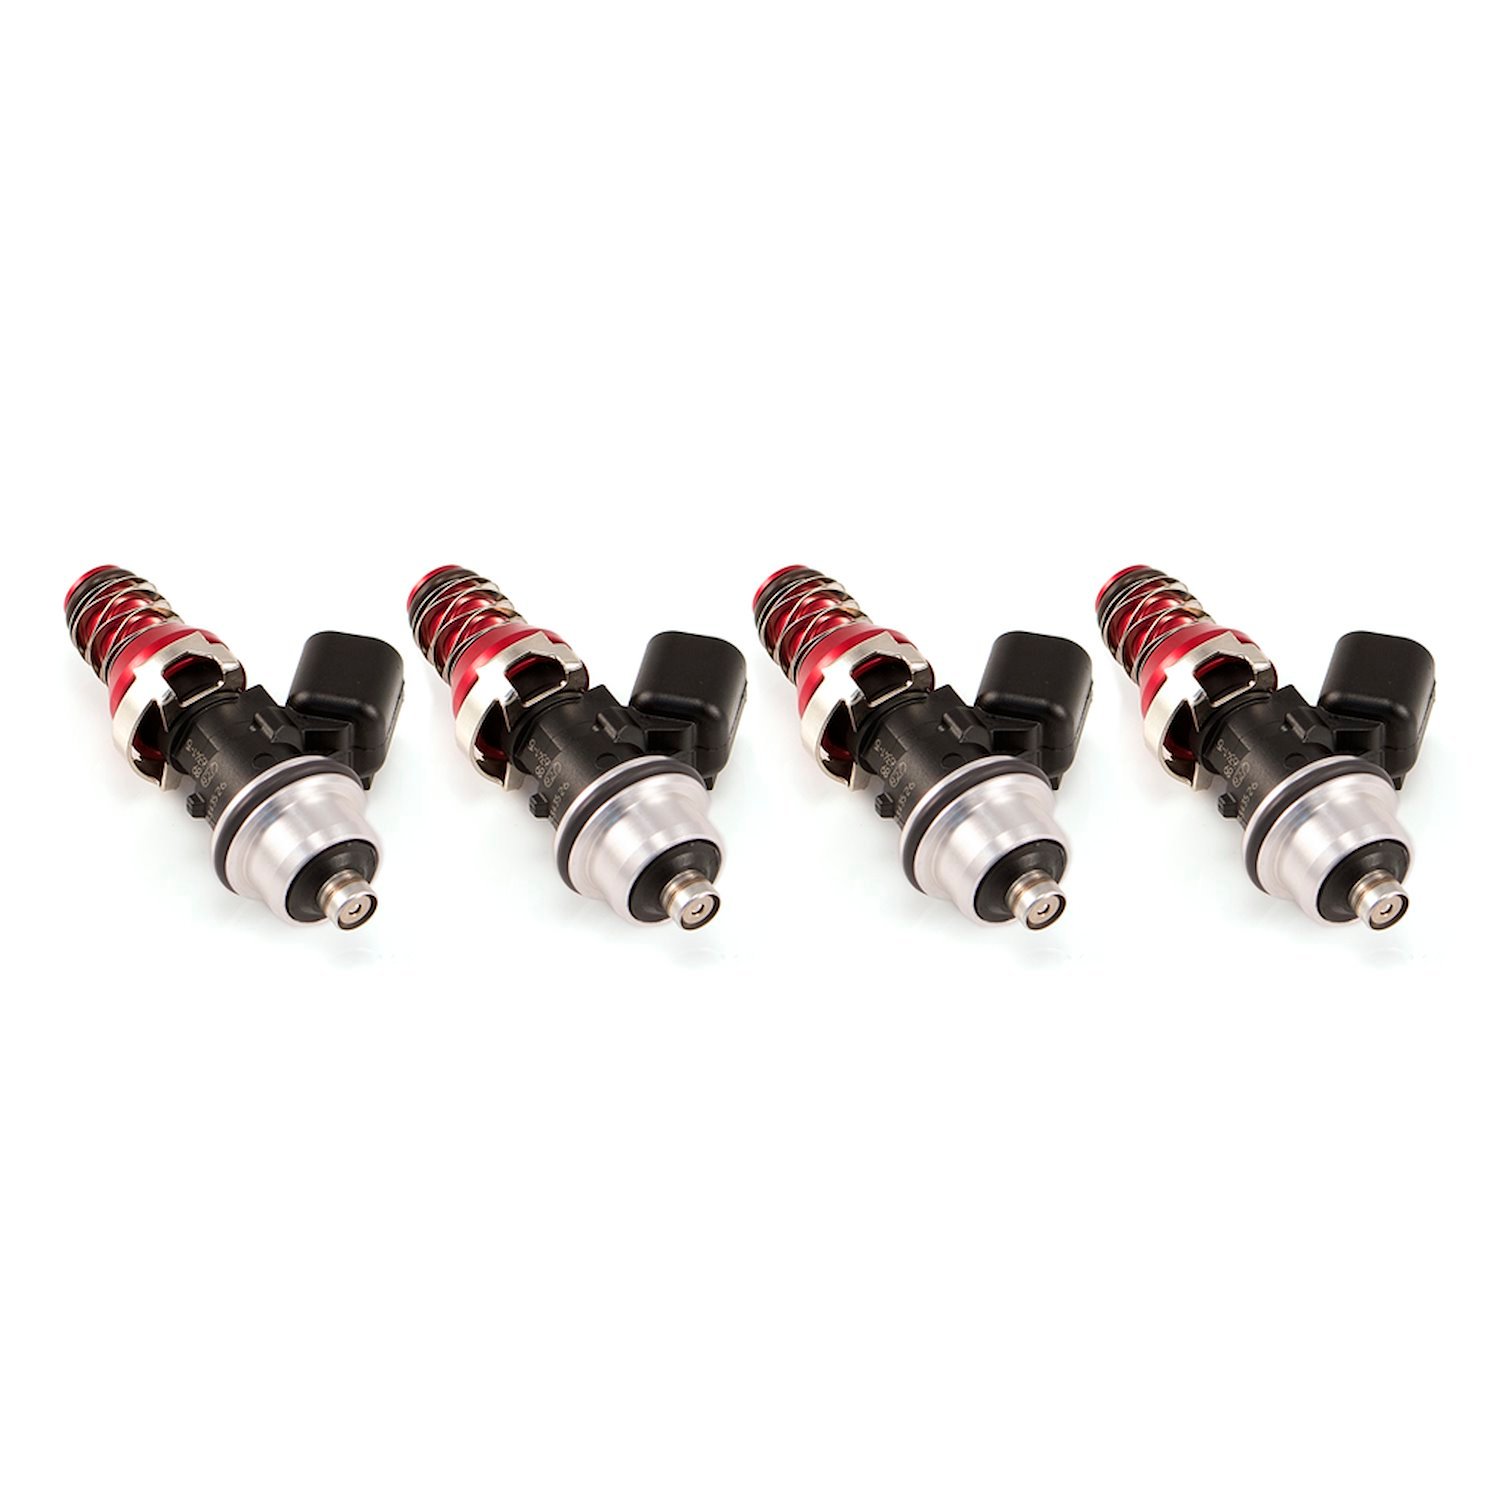 1700.48.11.F20.4 1700cc Fuel Injector Set, 48 mm Length, Machined Top to 11 mm, Honda S2000 Lower Configuration